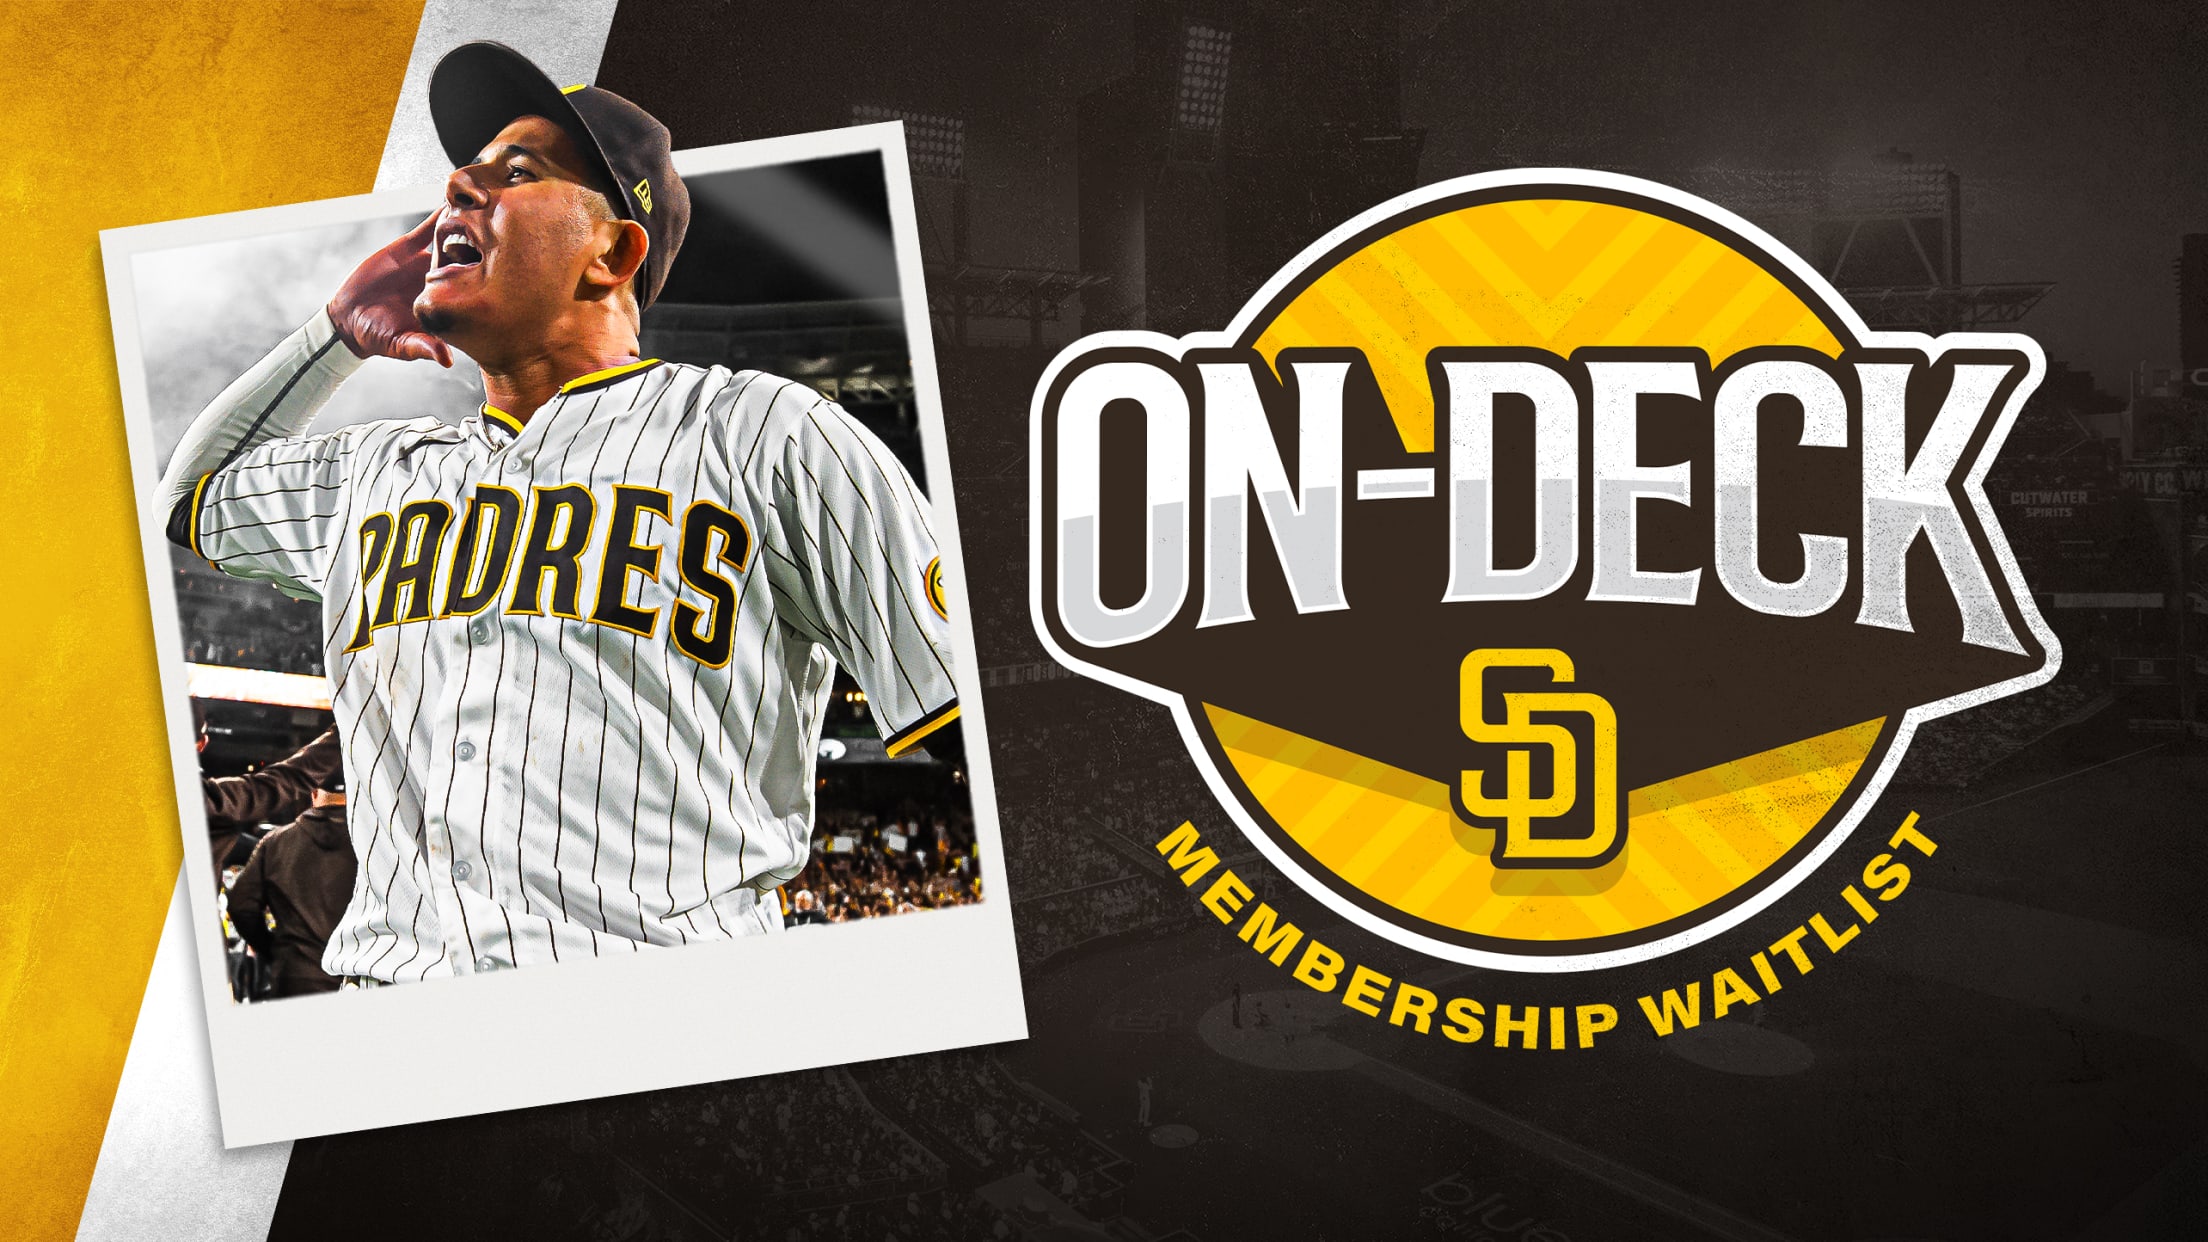 San Diego Padres - We've got lots of Padres gear coming at you this season  ‼️ Get your single-game tickets tomorrow, February 7 at 10am PT: padres.com/promotions